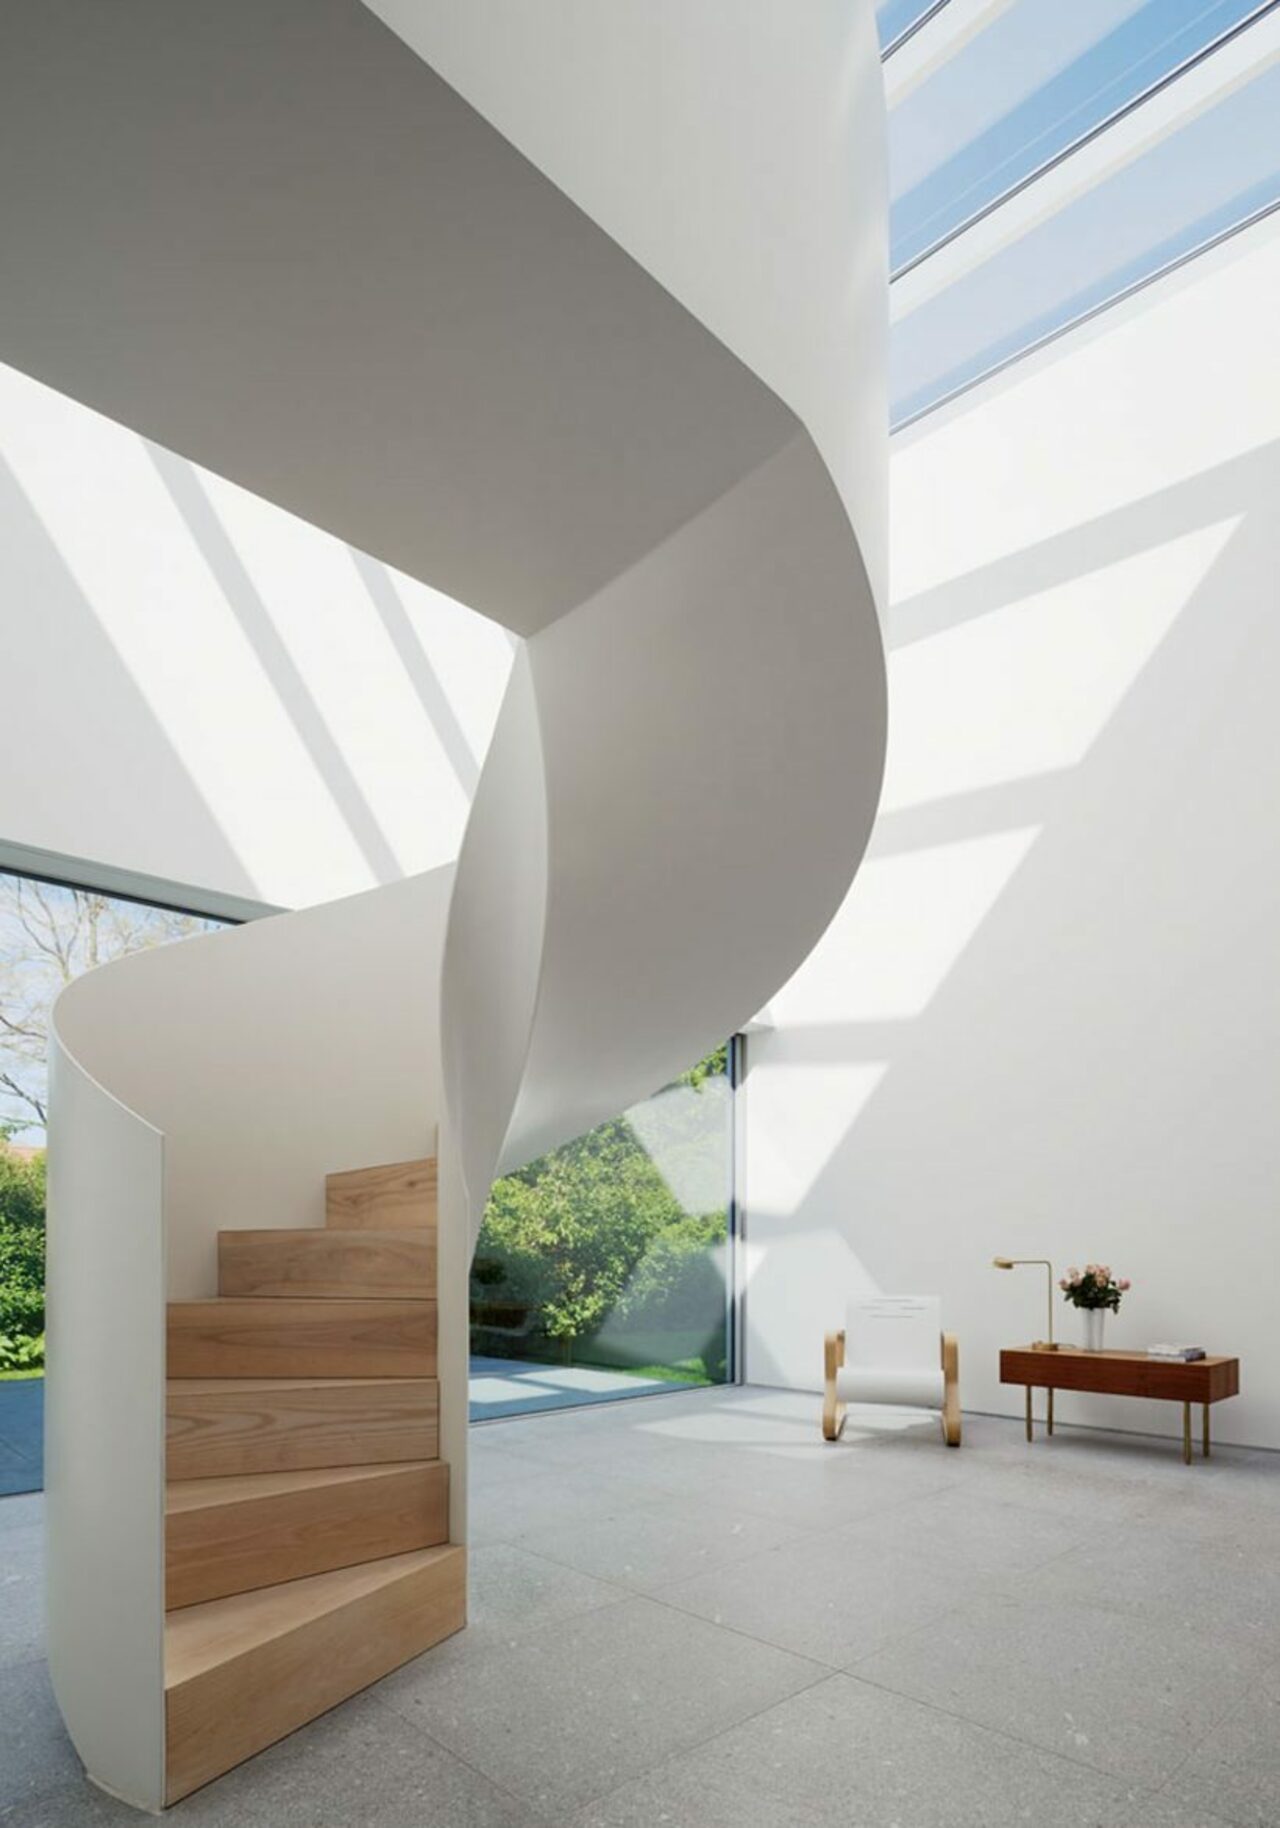 This #minimalist #staircase was designed to inspire! http://buff.ly/2doSZXI https://t.co/XLY7nAQczt